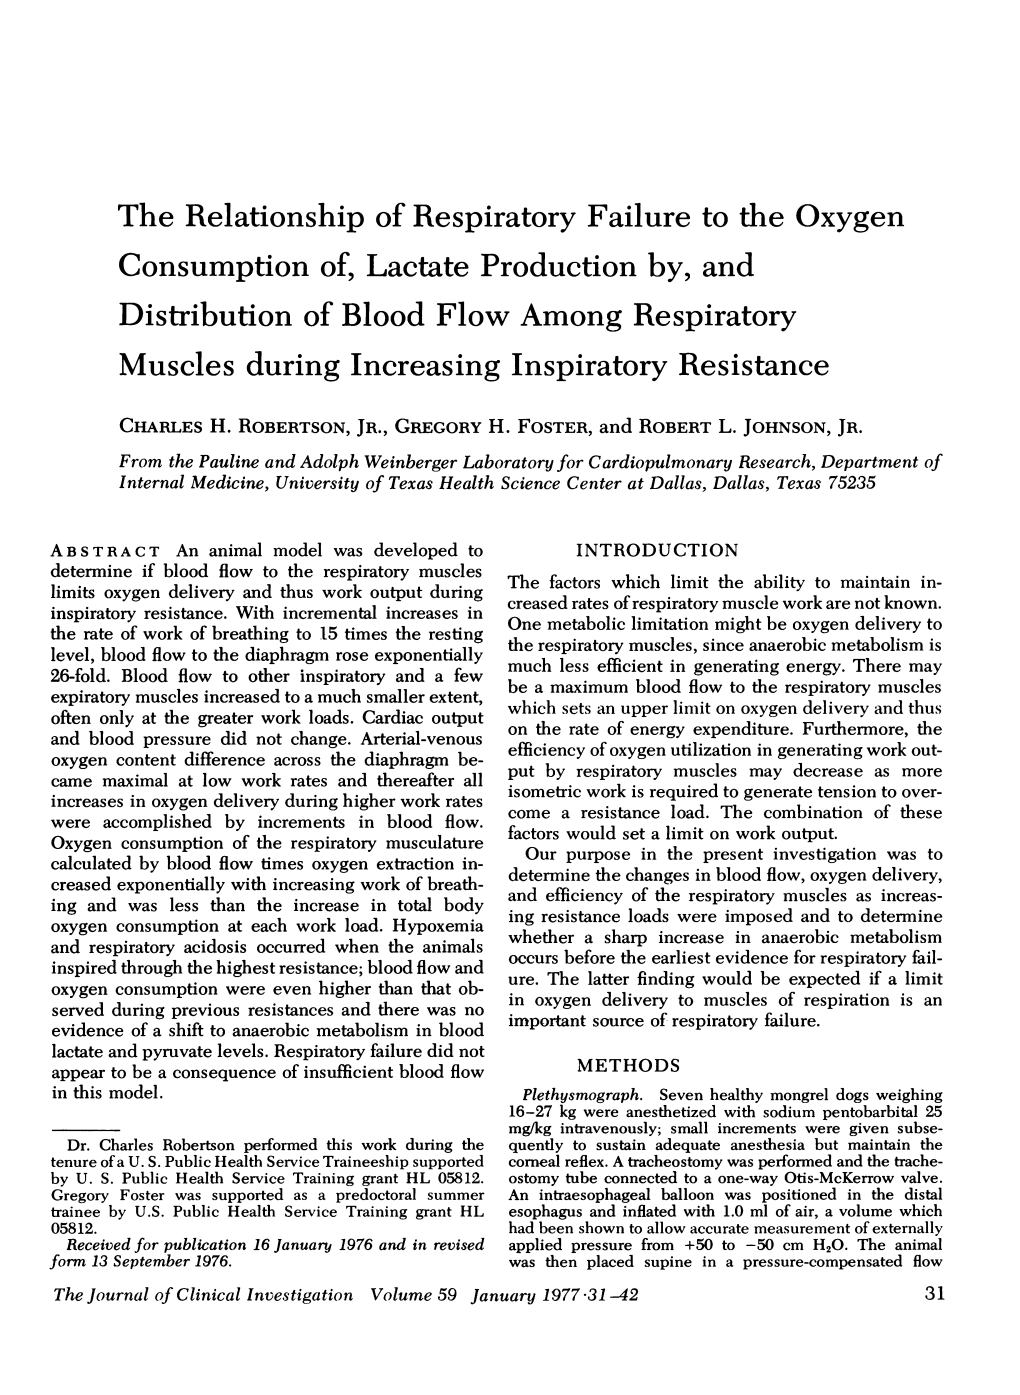 The Relationship of Respiratory Failure to the Oxygen Consumption